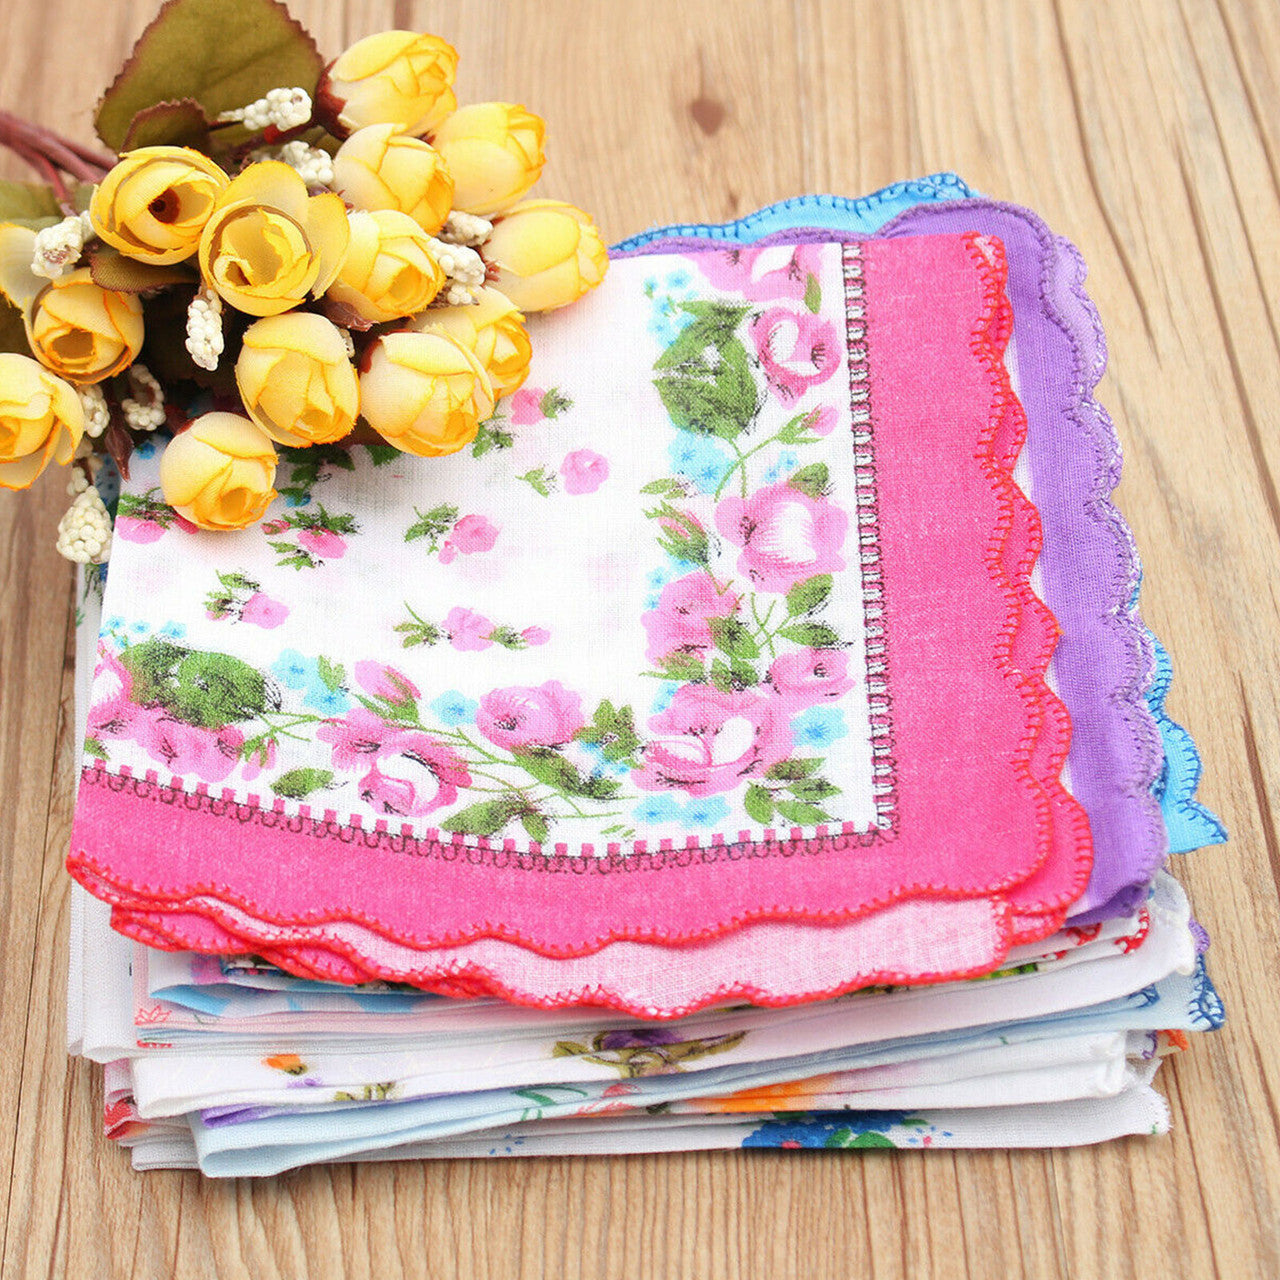 Women's Handkerchiefs, Colorful Printing Floral Ladies Handkerchiefs, 100% Cotton Classic, Pure Cotton Square Sheets, 20 Pieces